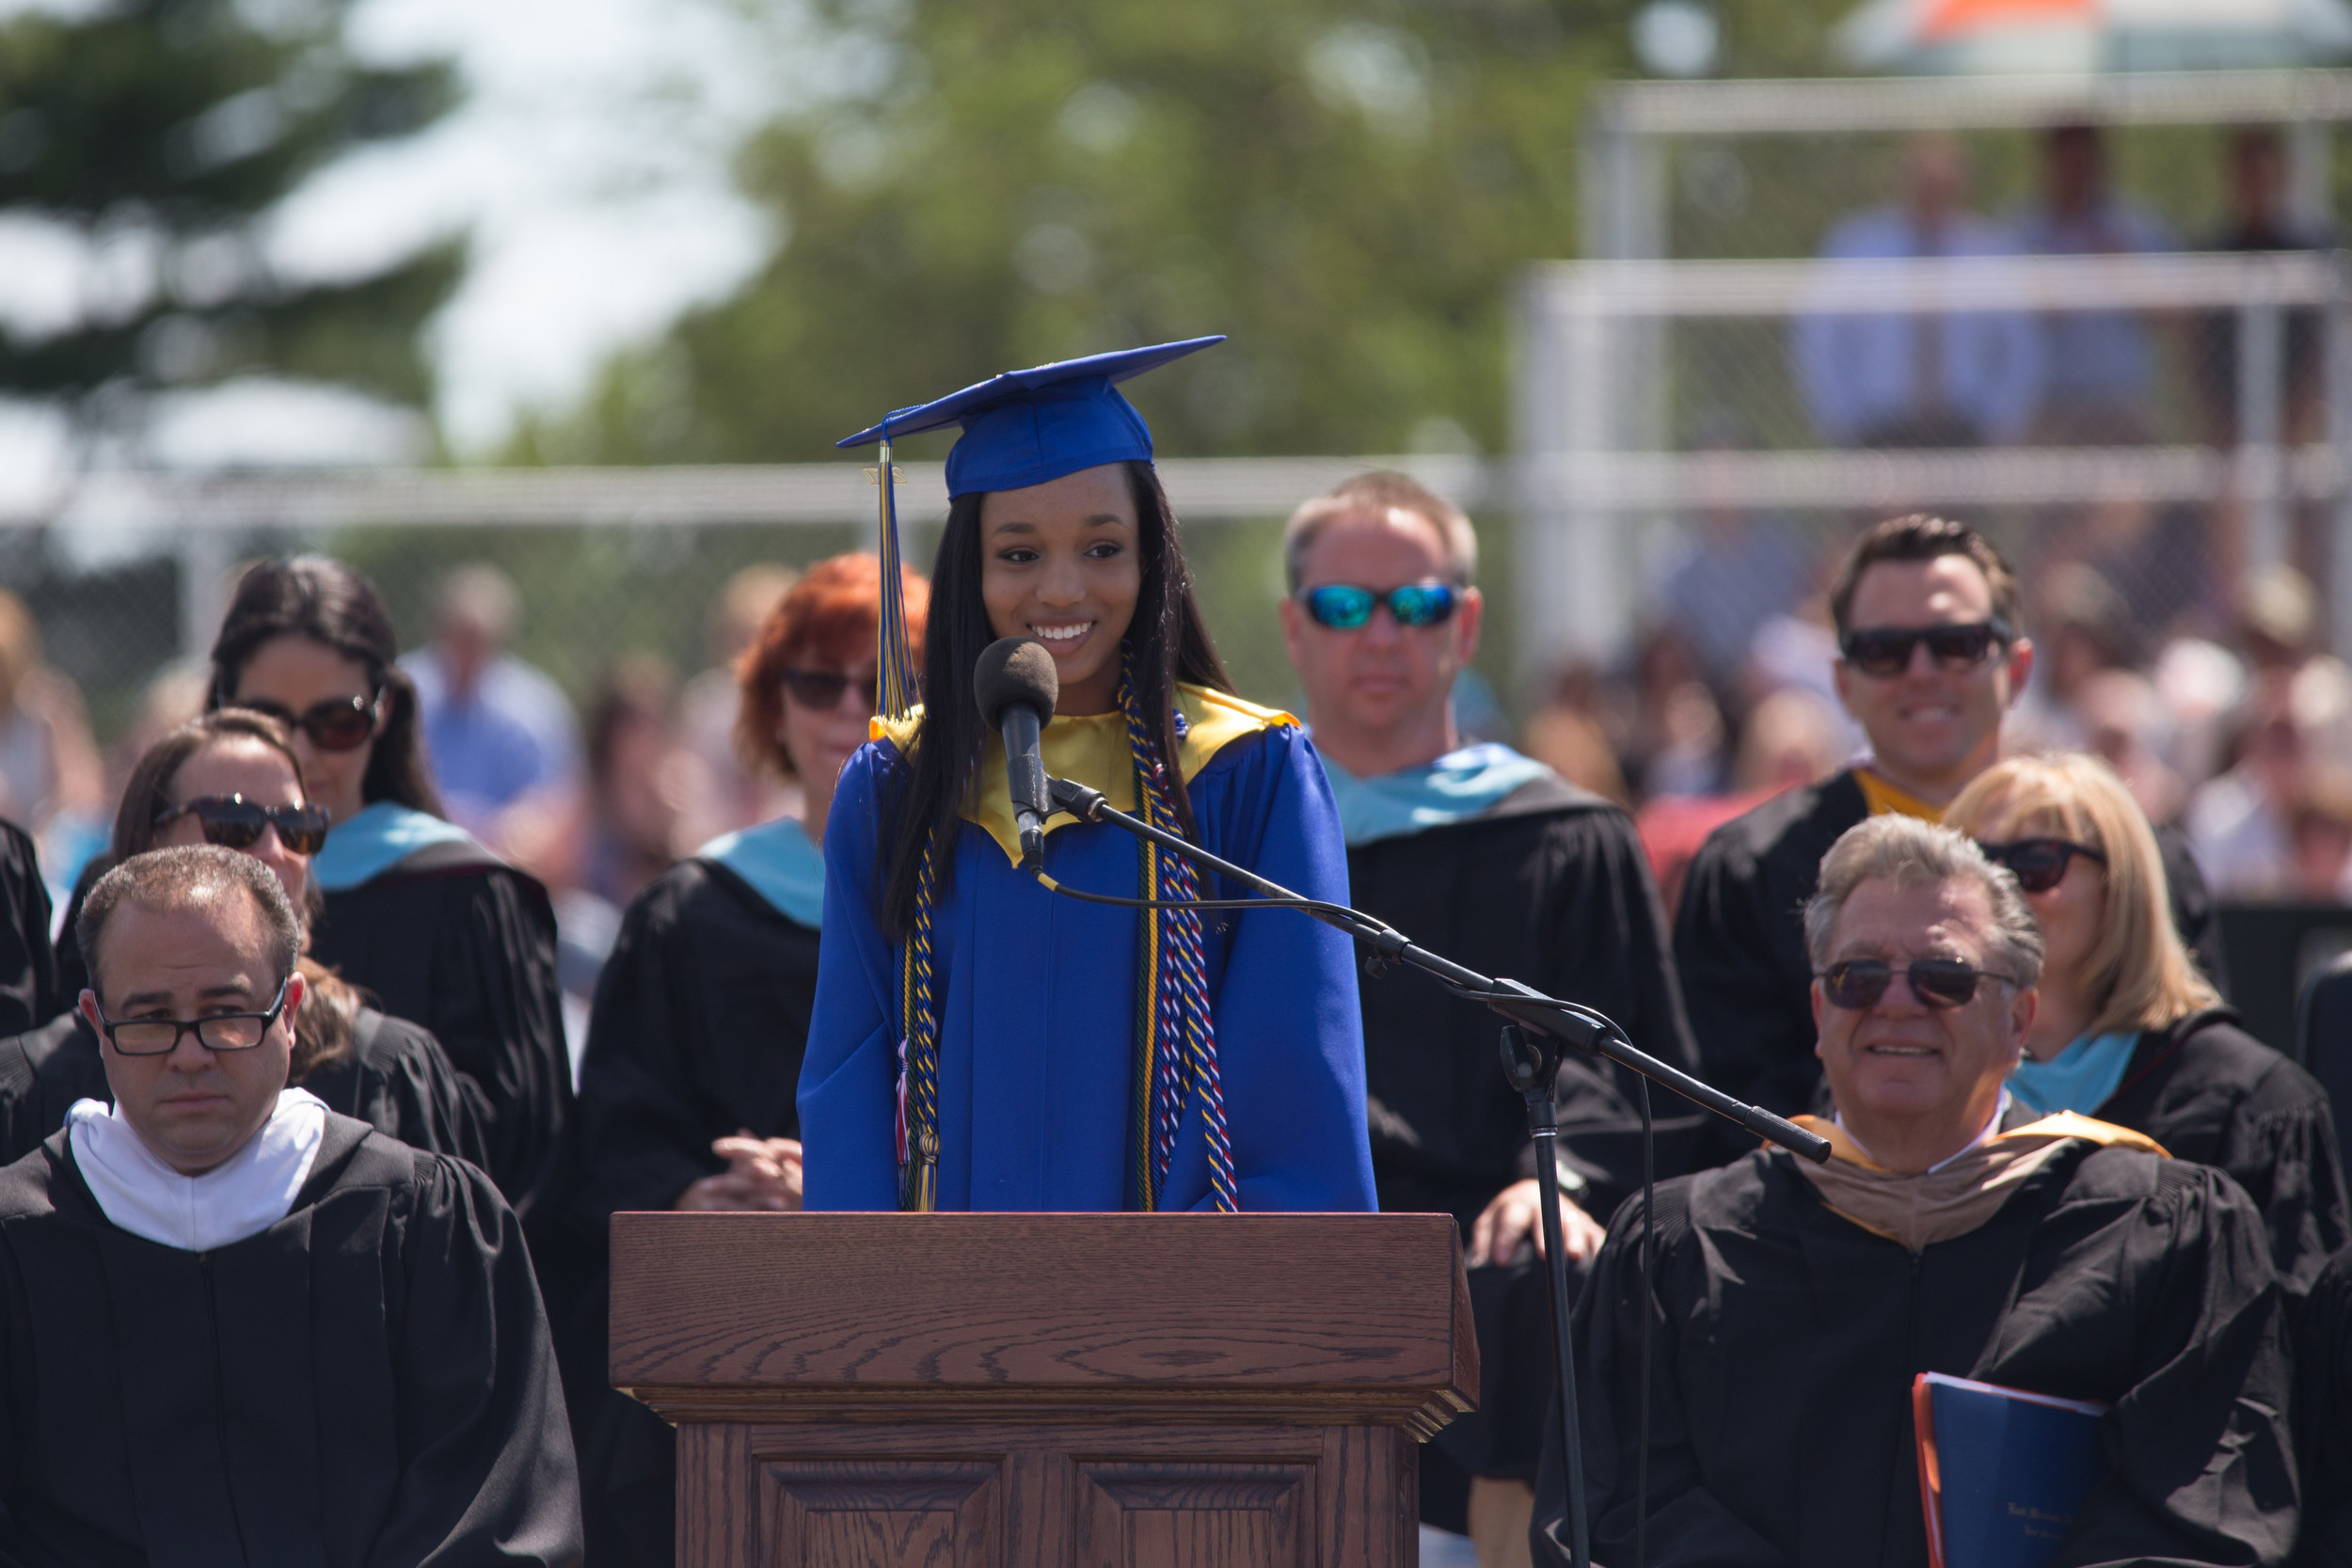 As her peers cheered her on, East Meadow High School’s valedictorian Mahalia Mathelier smiled at the crowd.